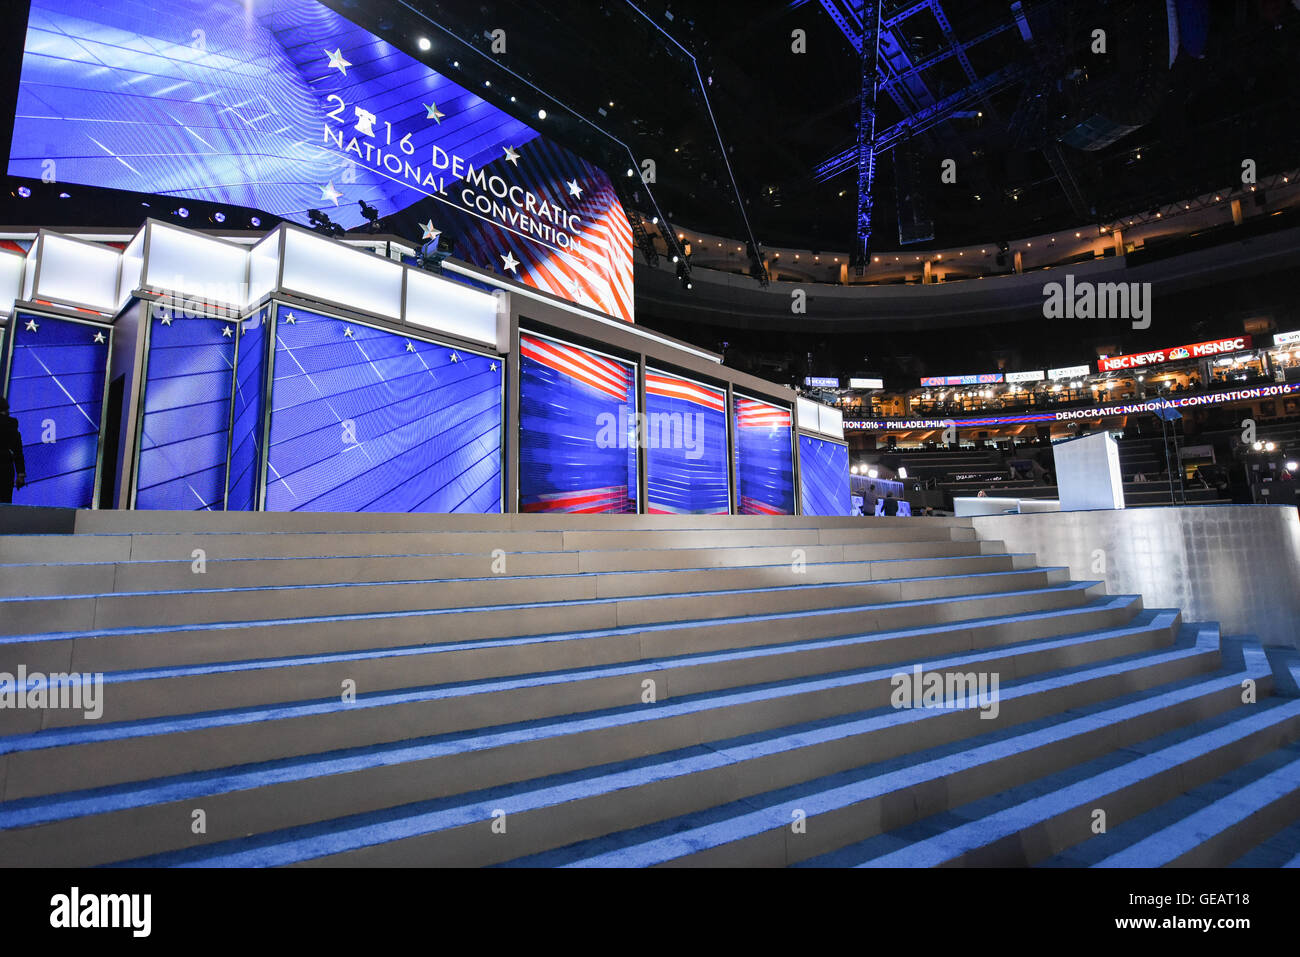 Philadelphia, USA. 25th July, 2016. Democratic National Convention in Philadelphia.Set up for the stage is complete at the DNC Democratic National Convention Credit:  Don Mennig/Alamy Live News Stock Photo